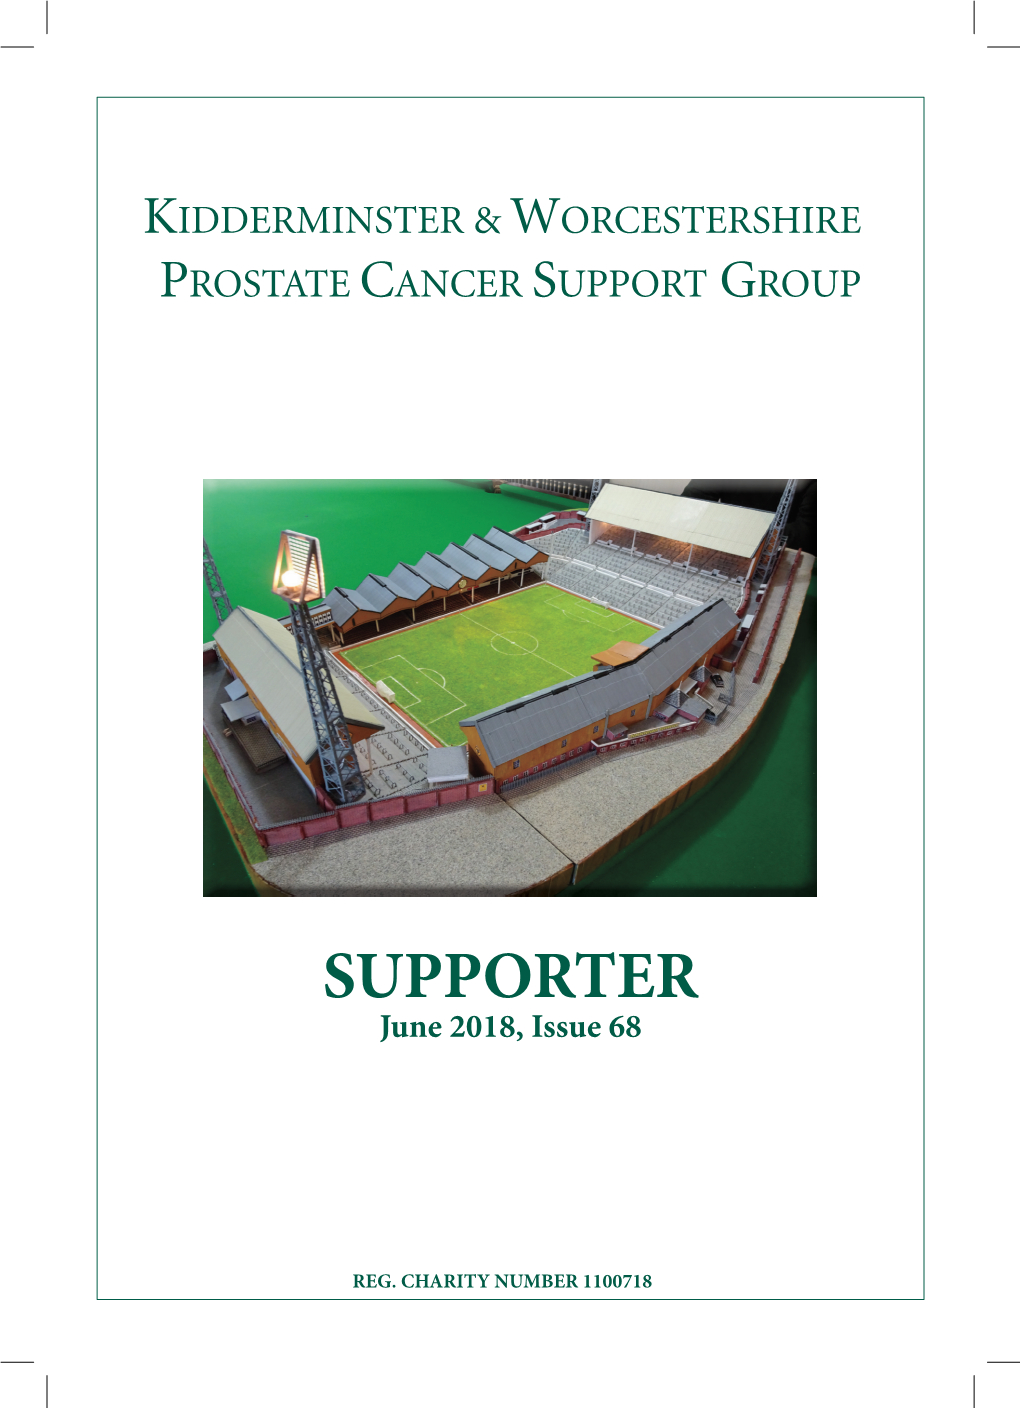 SUPPORTER June 2018, Issue 68